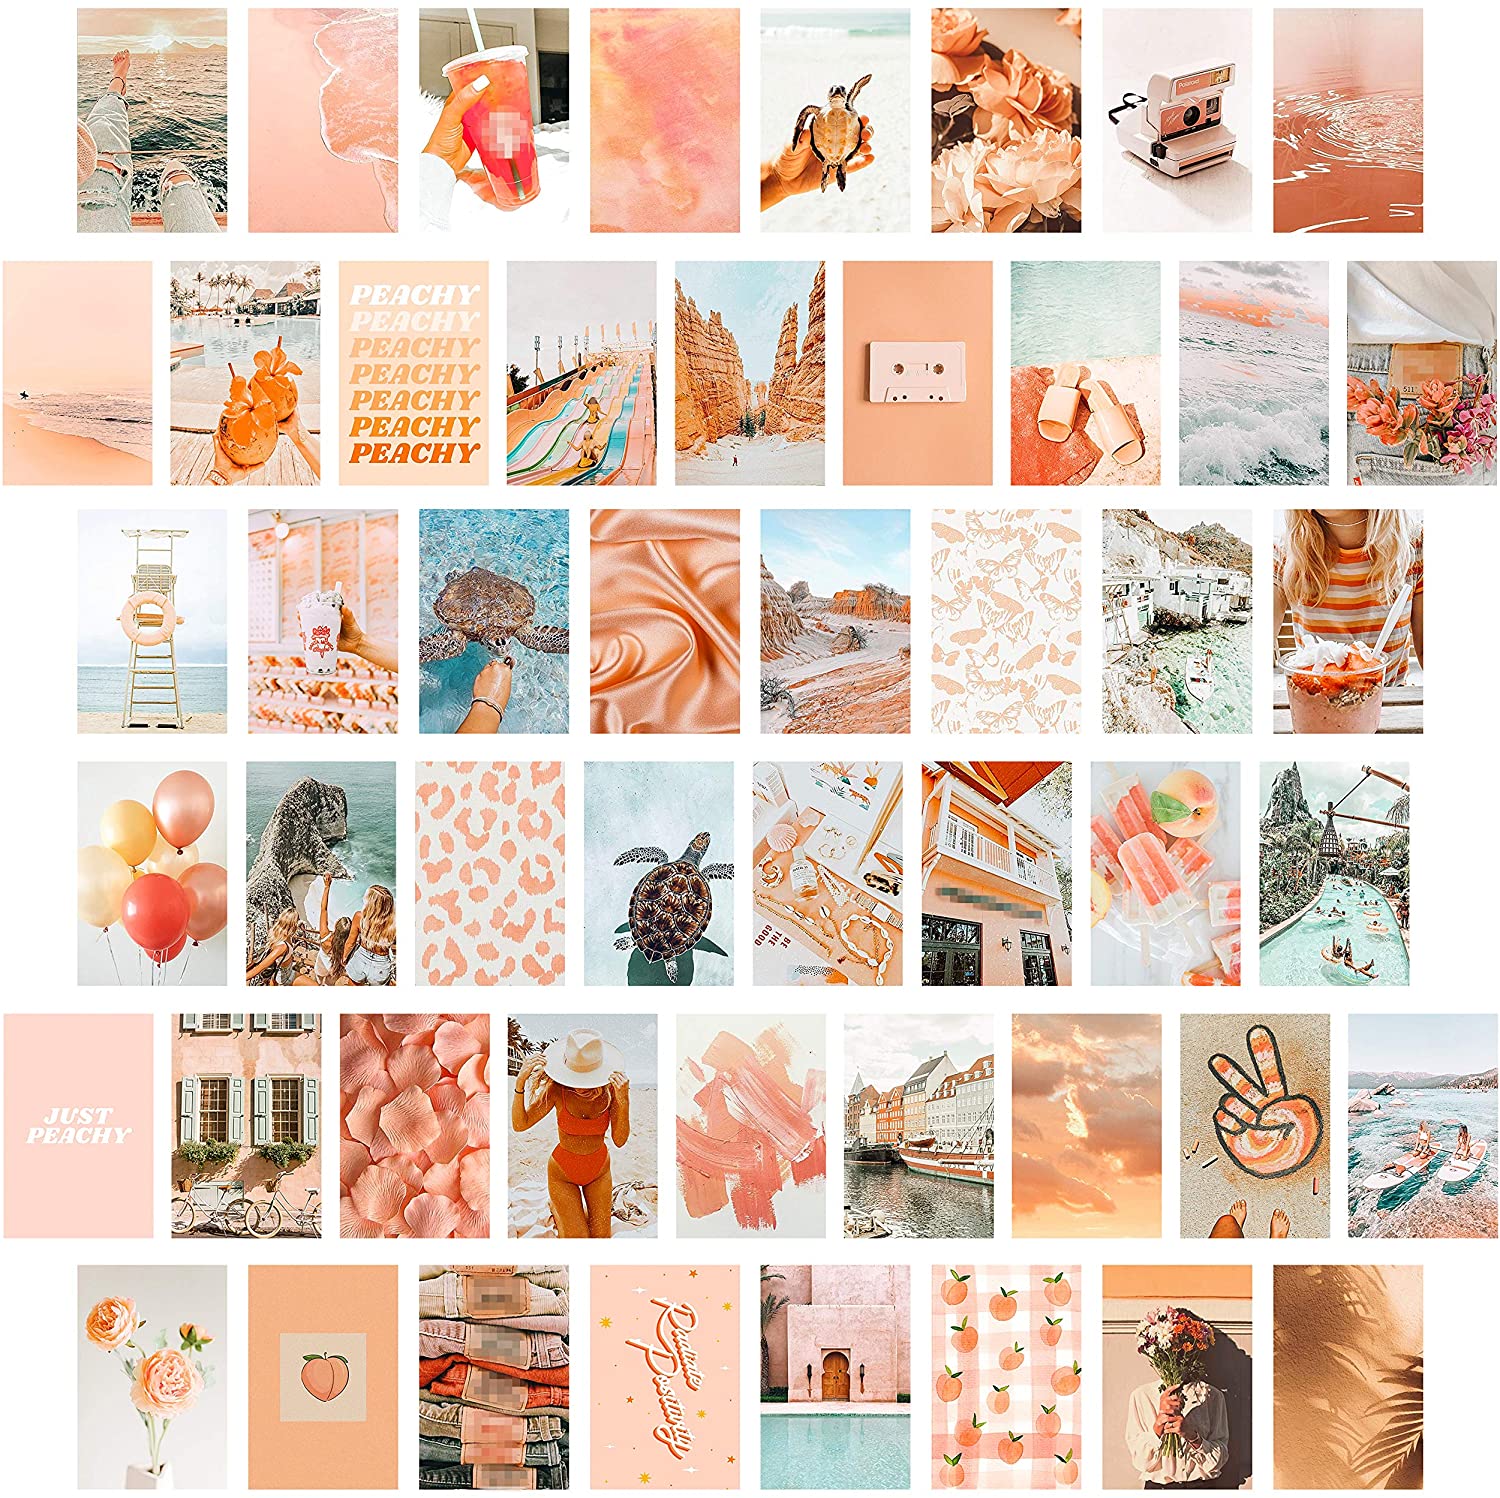 CY2SIDE 50PCS Peach Beach Aesthetic Picture for Wall Collage, 50 Set 4x6 inch, Boho Style Collage Print Kit, Teal Color Room Decor for Girls, Wall Art Print for Room, Dorm Photo